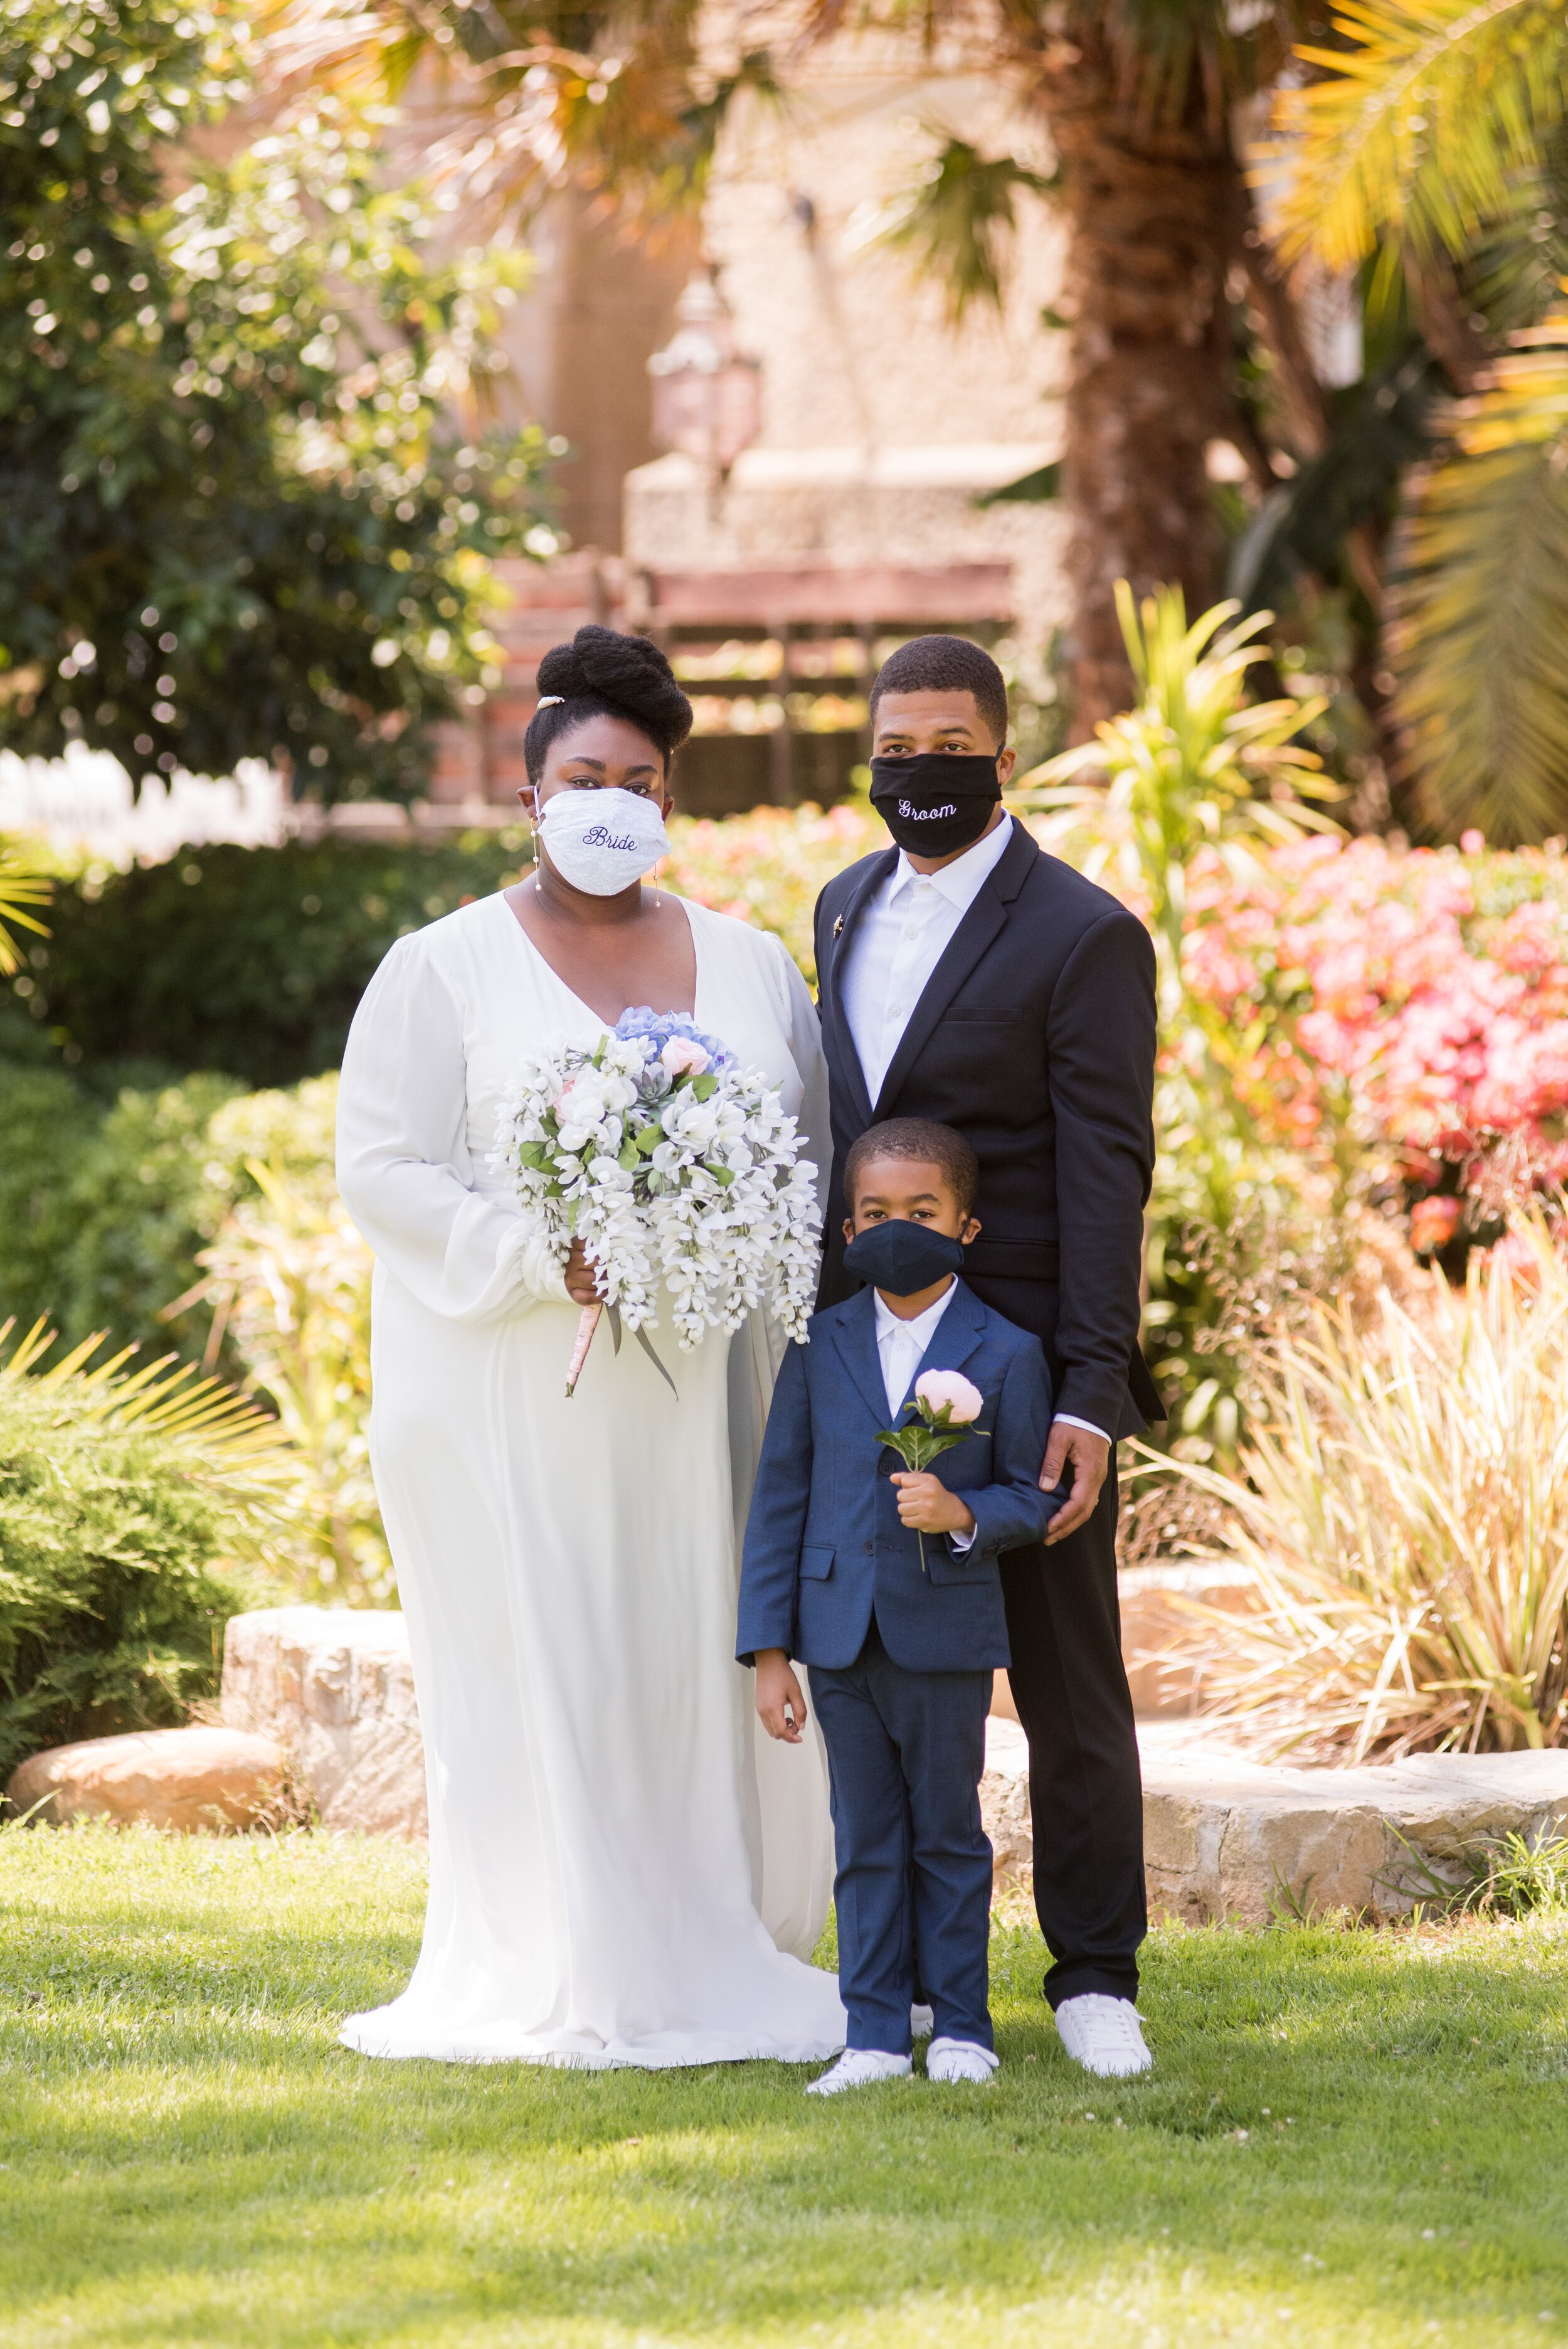 www.santabarbarawedding.com | ByCherry Photography | Santa Barbara Courthouse | Bride and Groom and Their Son  Outside the Courthouse with Their Masks On